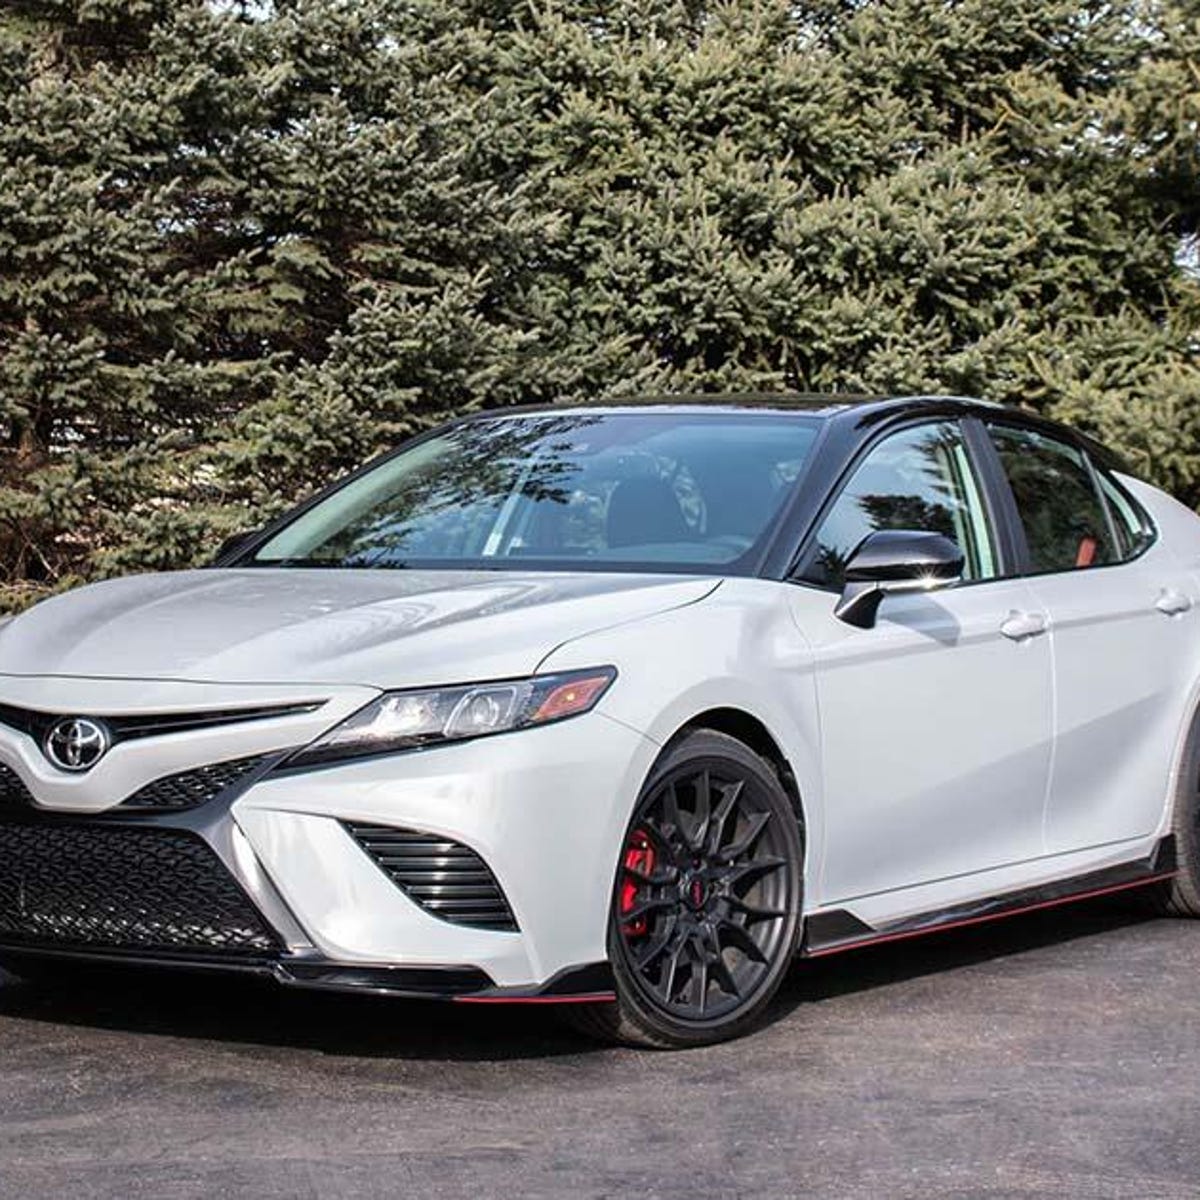 Toyota Camry Performance Upgrades. How to Make It Faster  